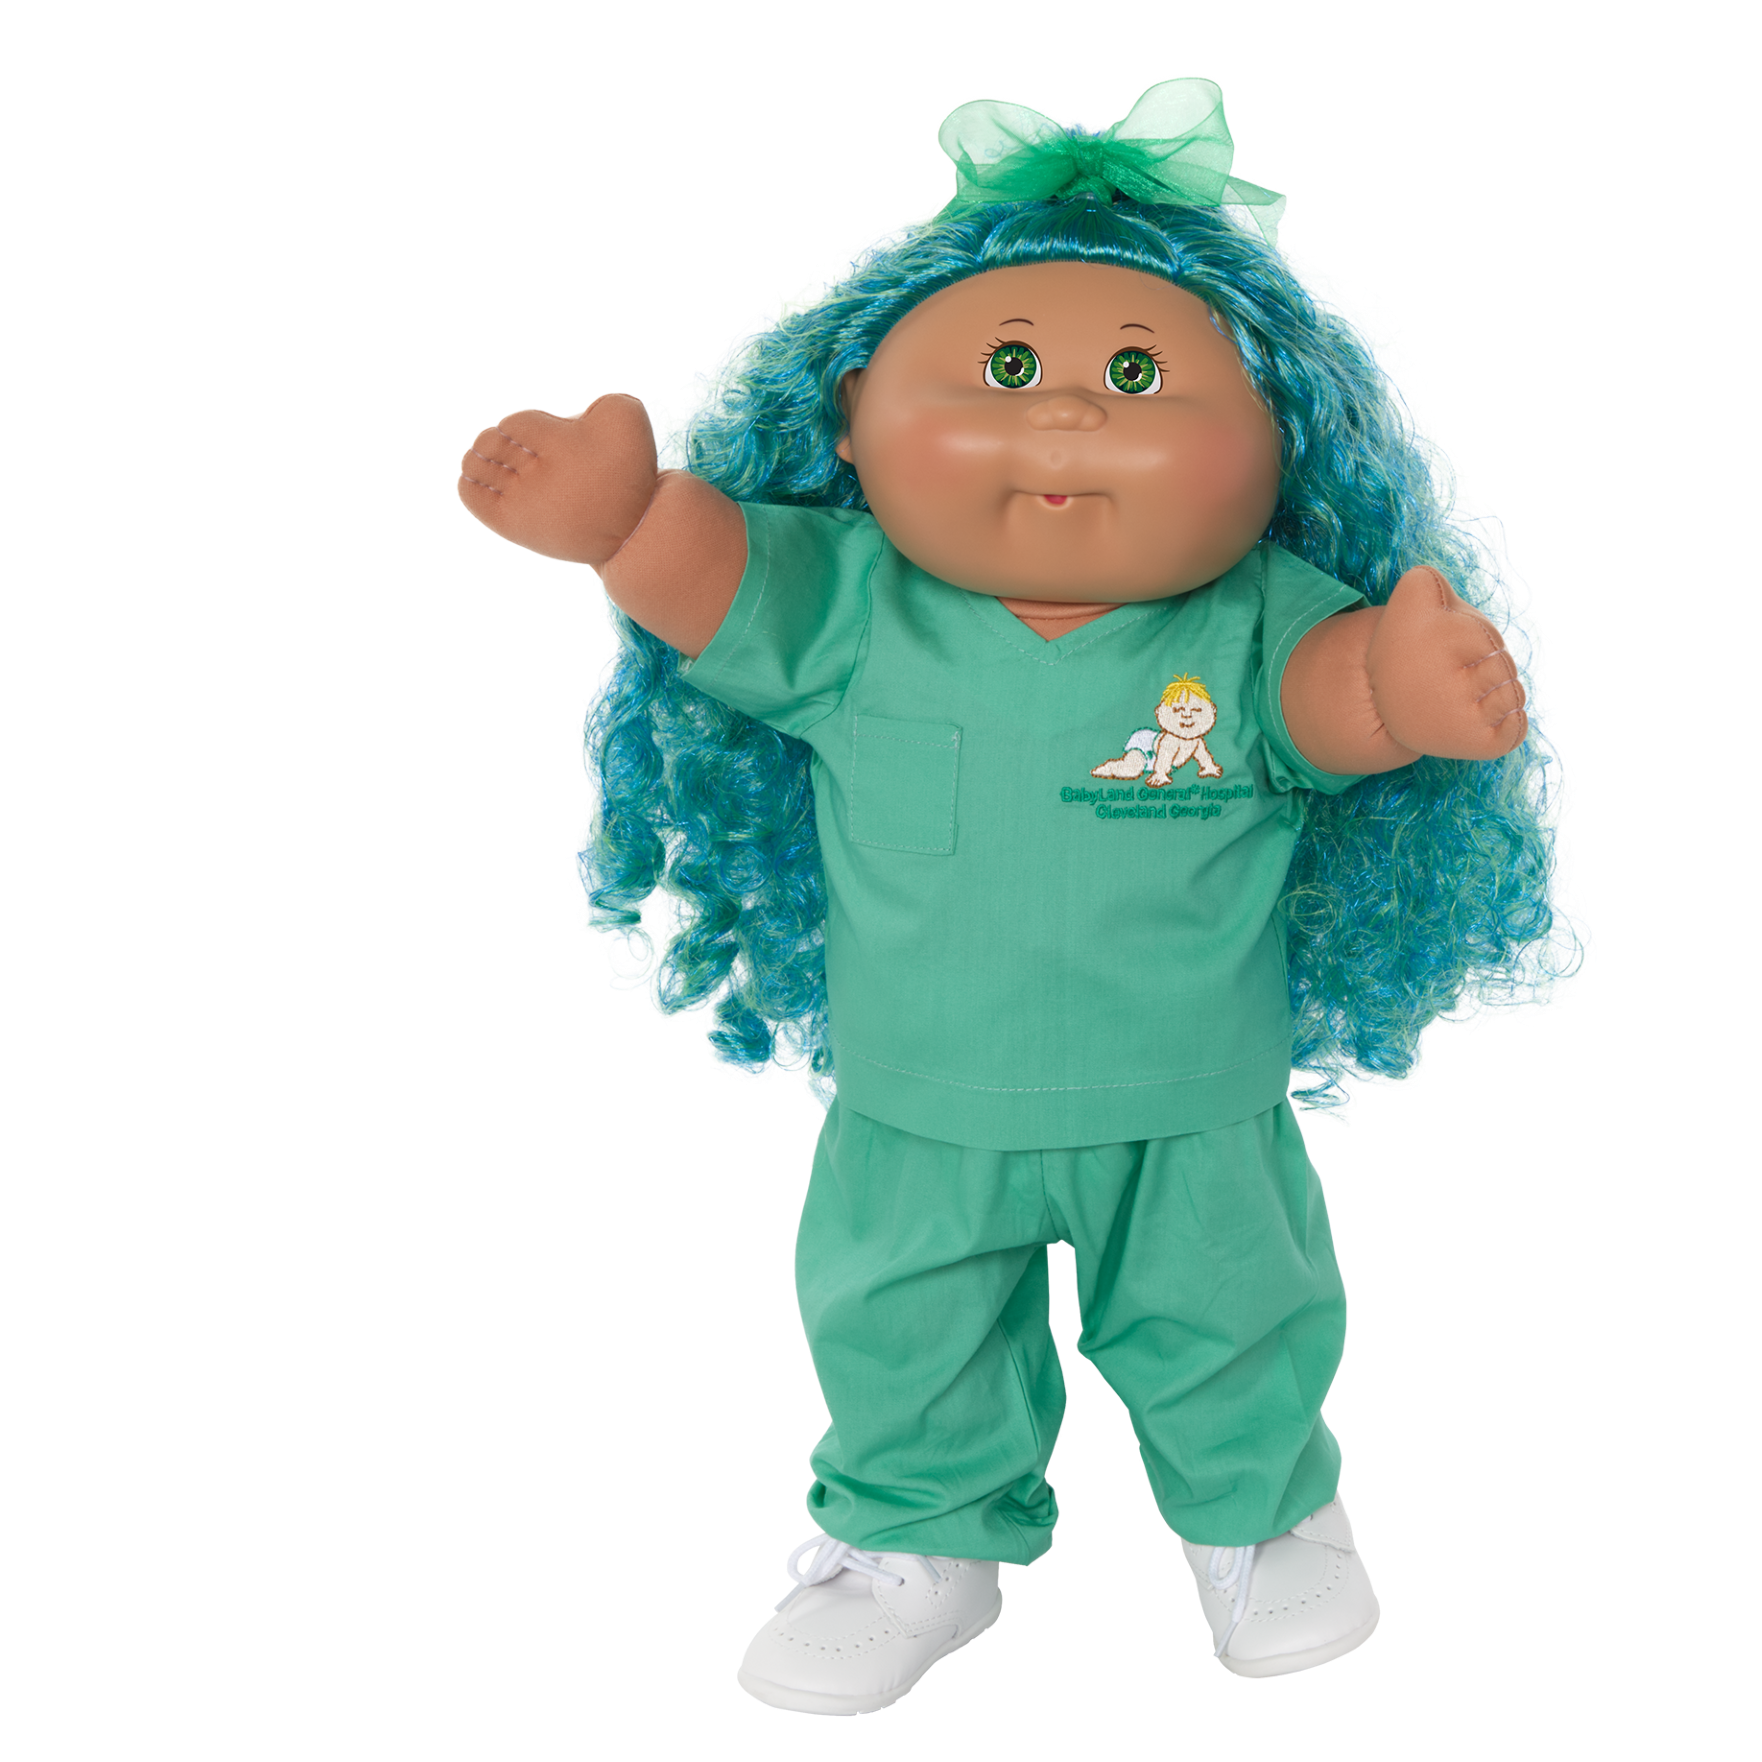 CPW0968-Green Scrubs Cabbage Patch Kids